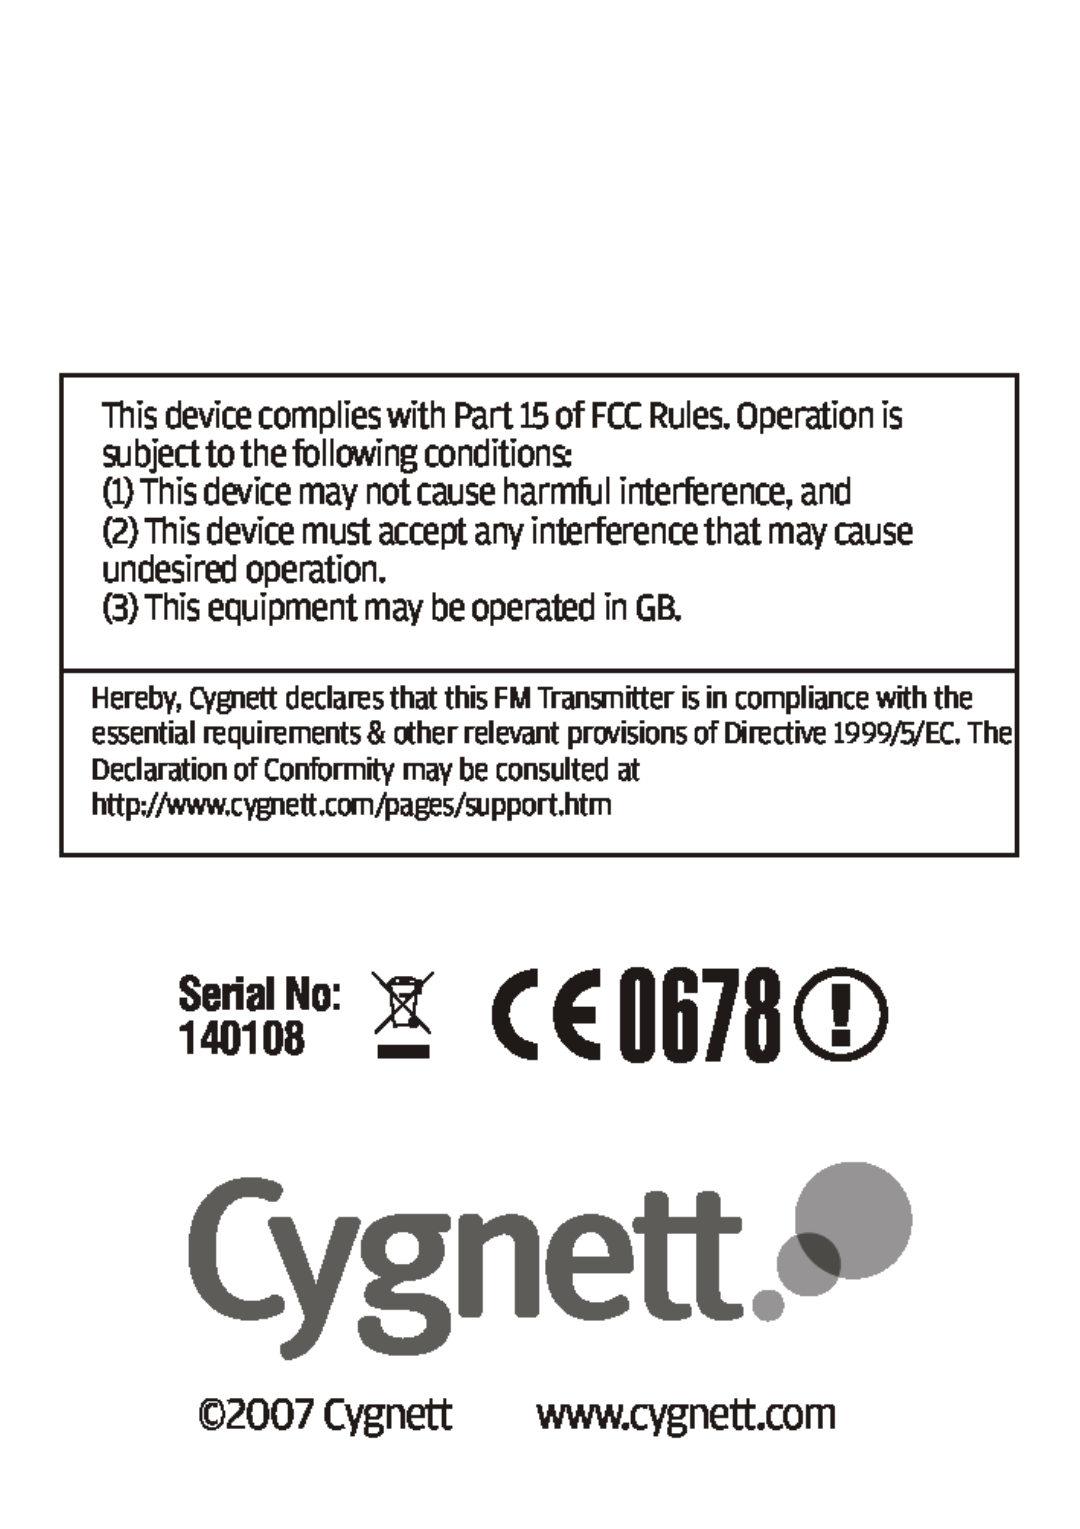 Cygnett Mini Wireless FM transmitter This device may not cause harmful interference, and, Cygnett, Serial No 1401080678 